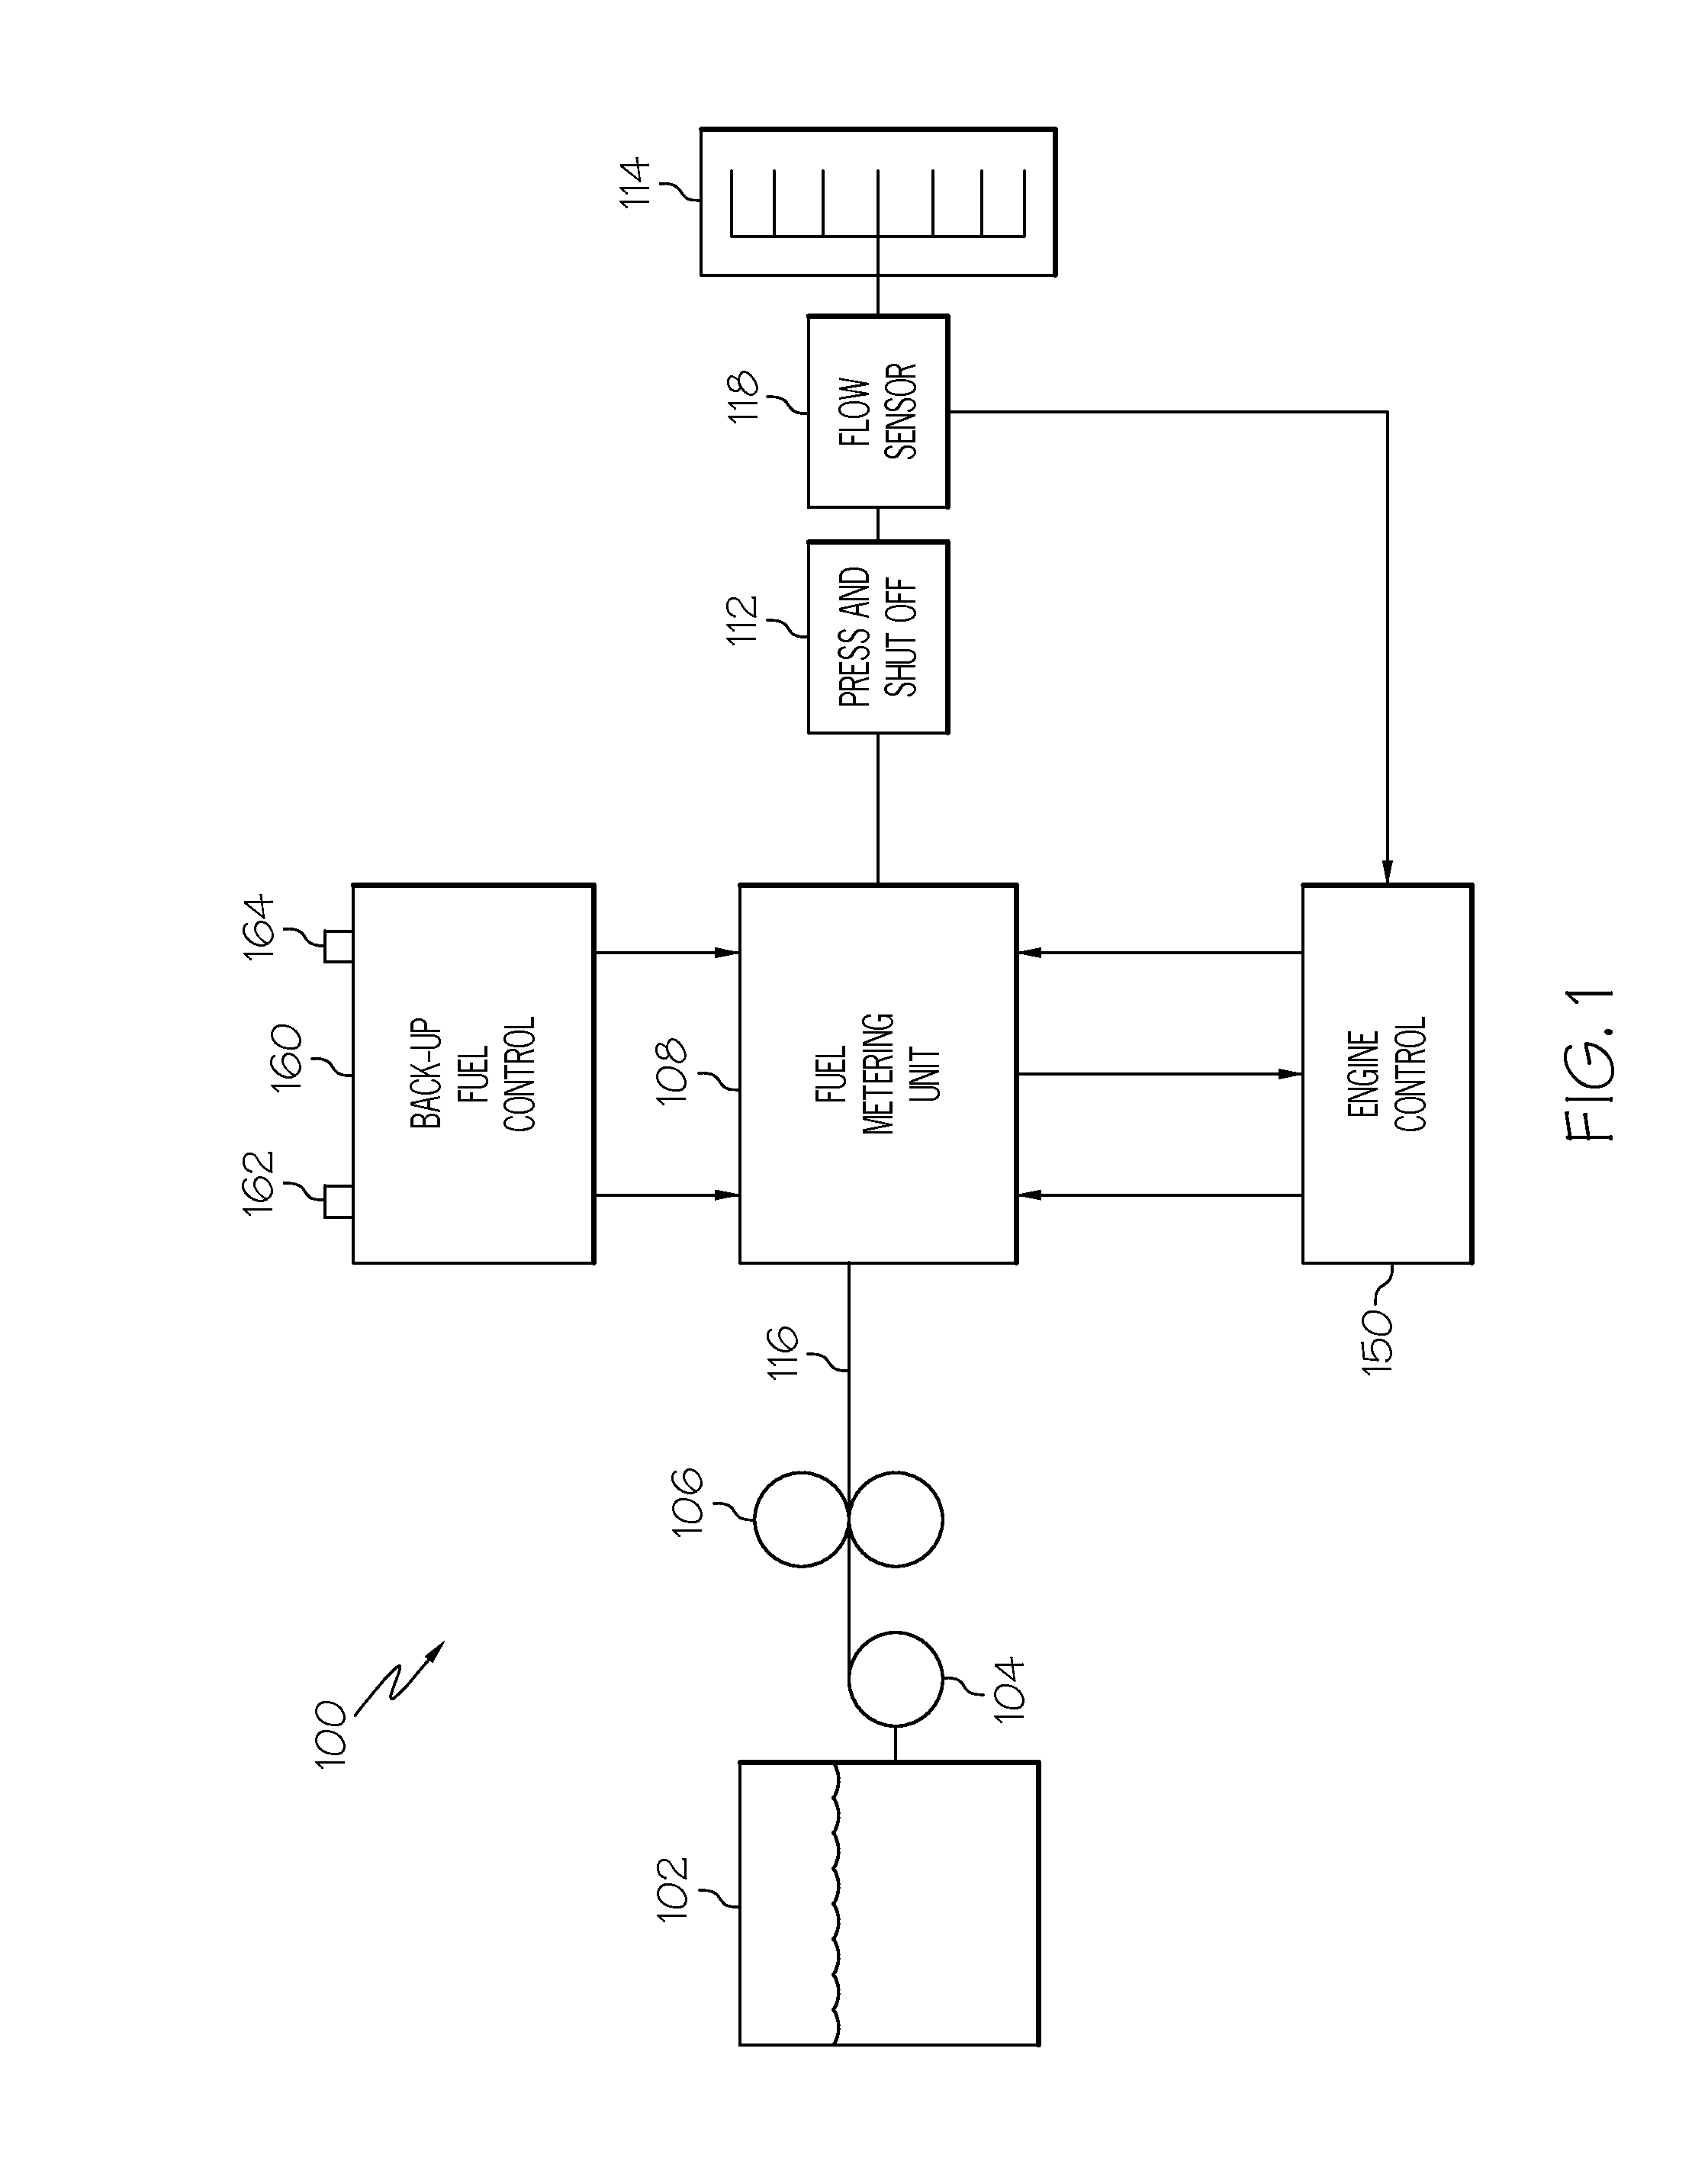 Gas turbine engine fuel metering valve adapted to selectively receive fuel flow increase/decrease commands from the engine control and from the back-up fuel control